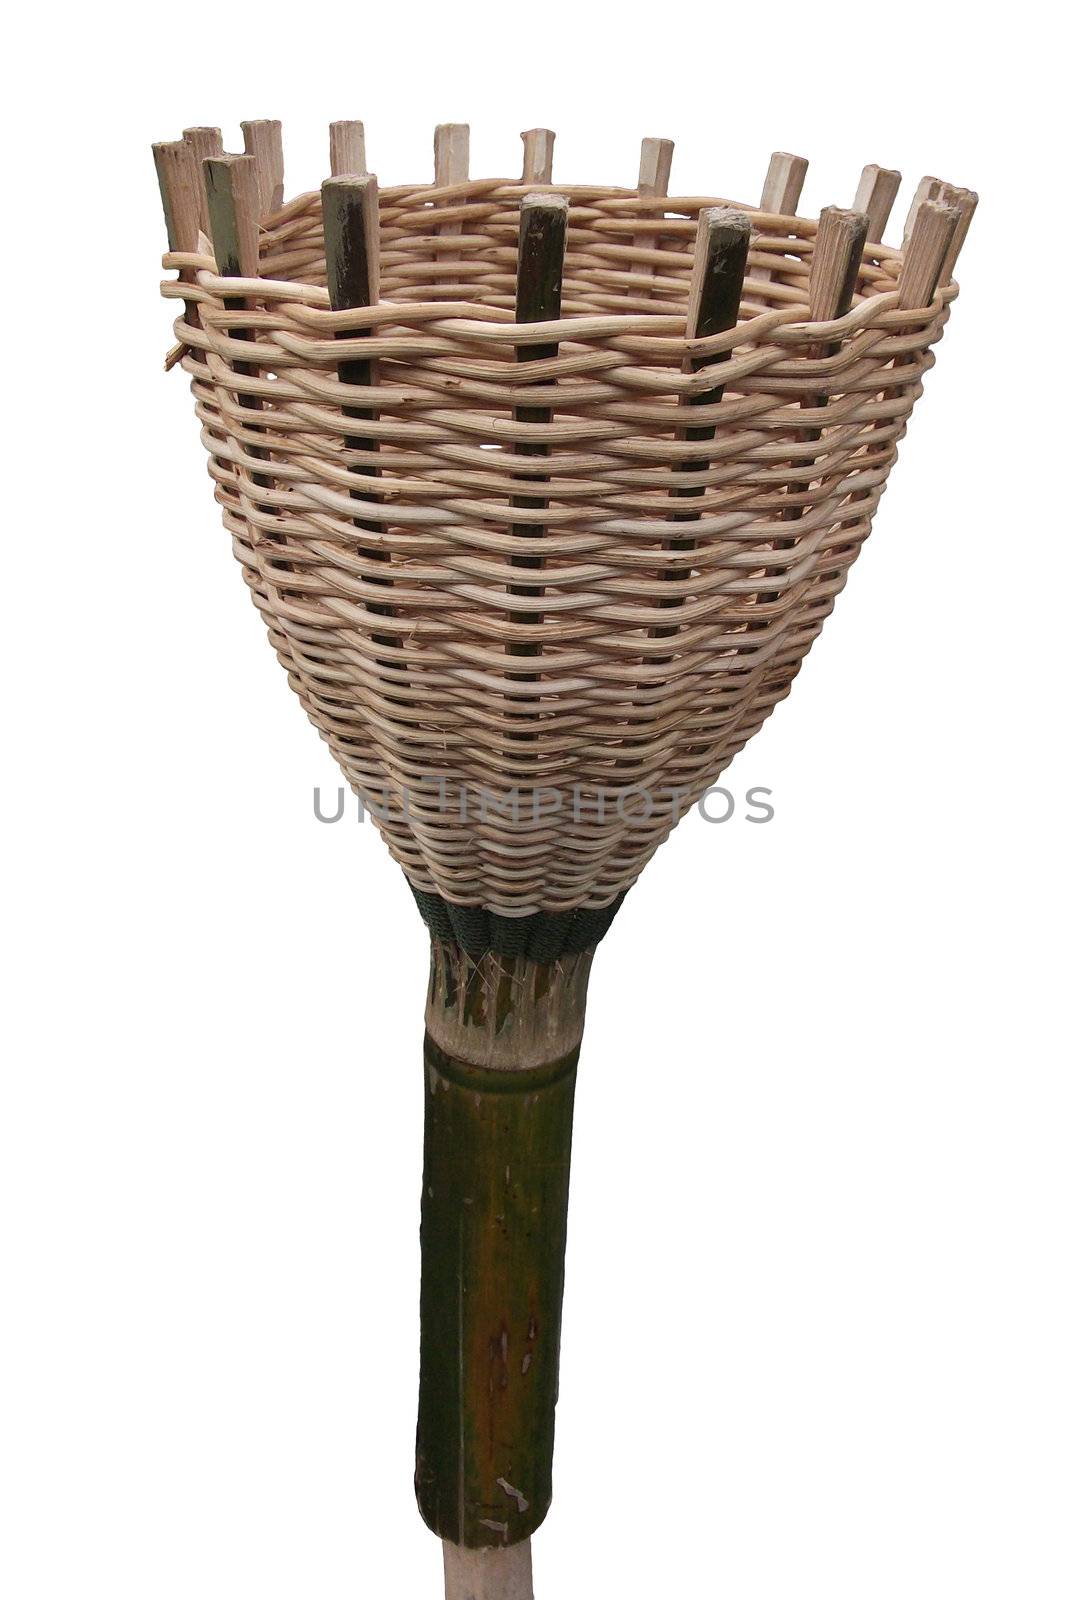 Fruit-picker made of a wicker scoop fixed to a long handle